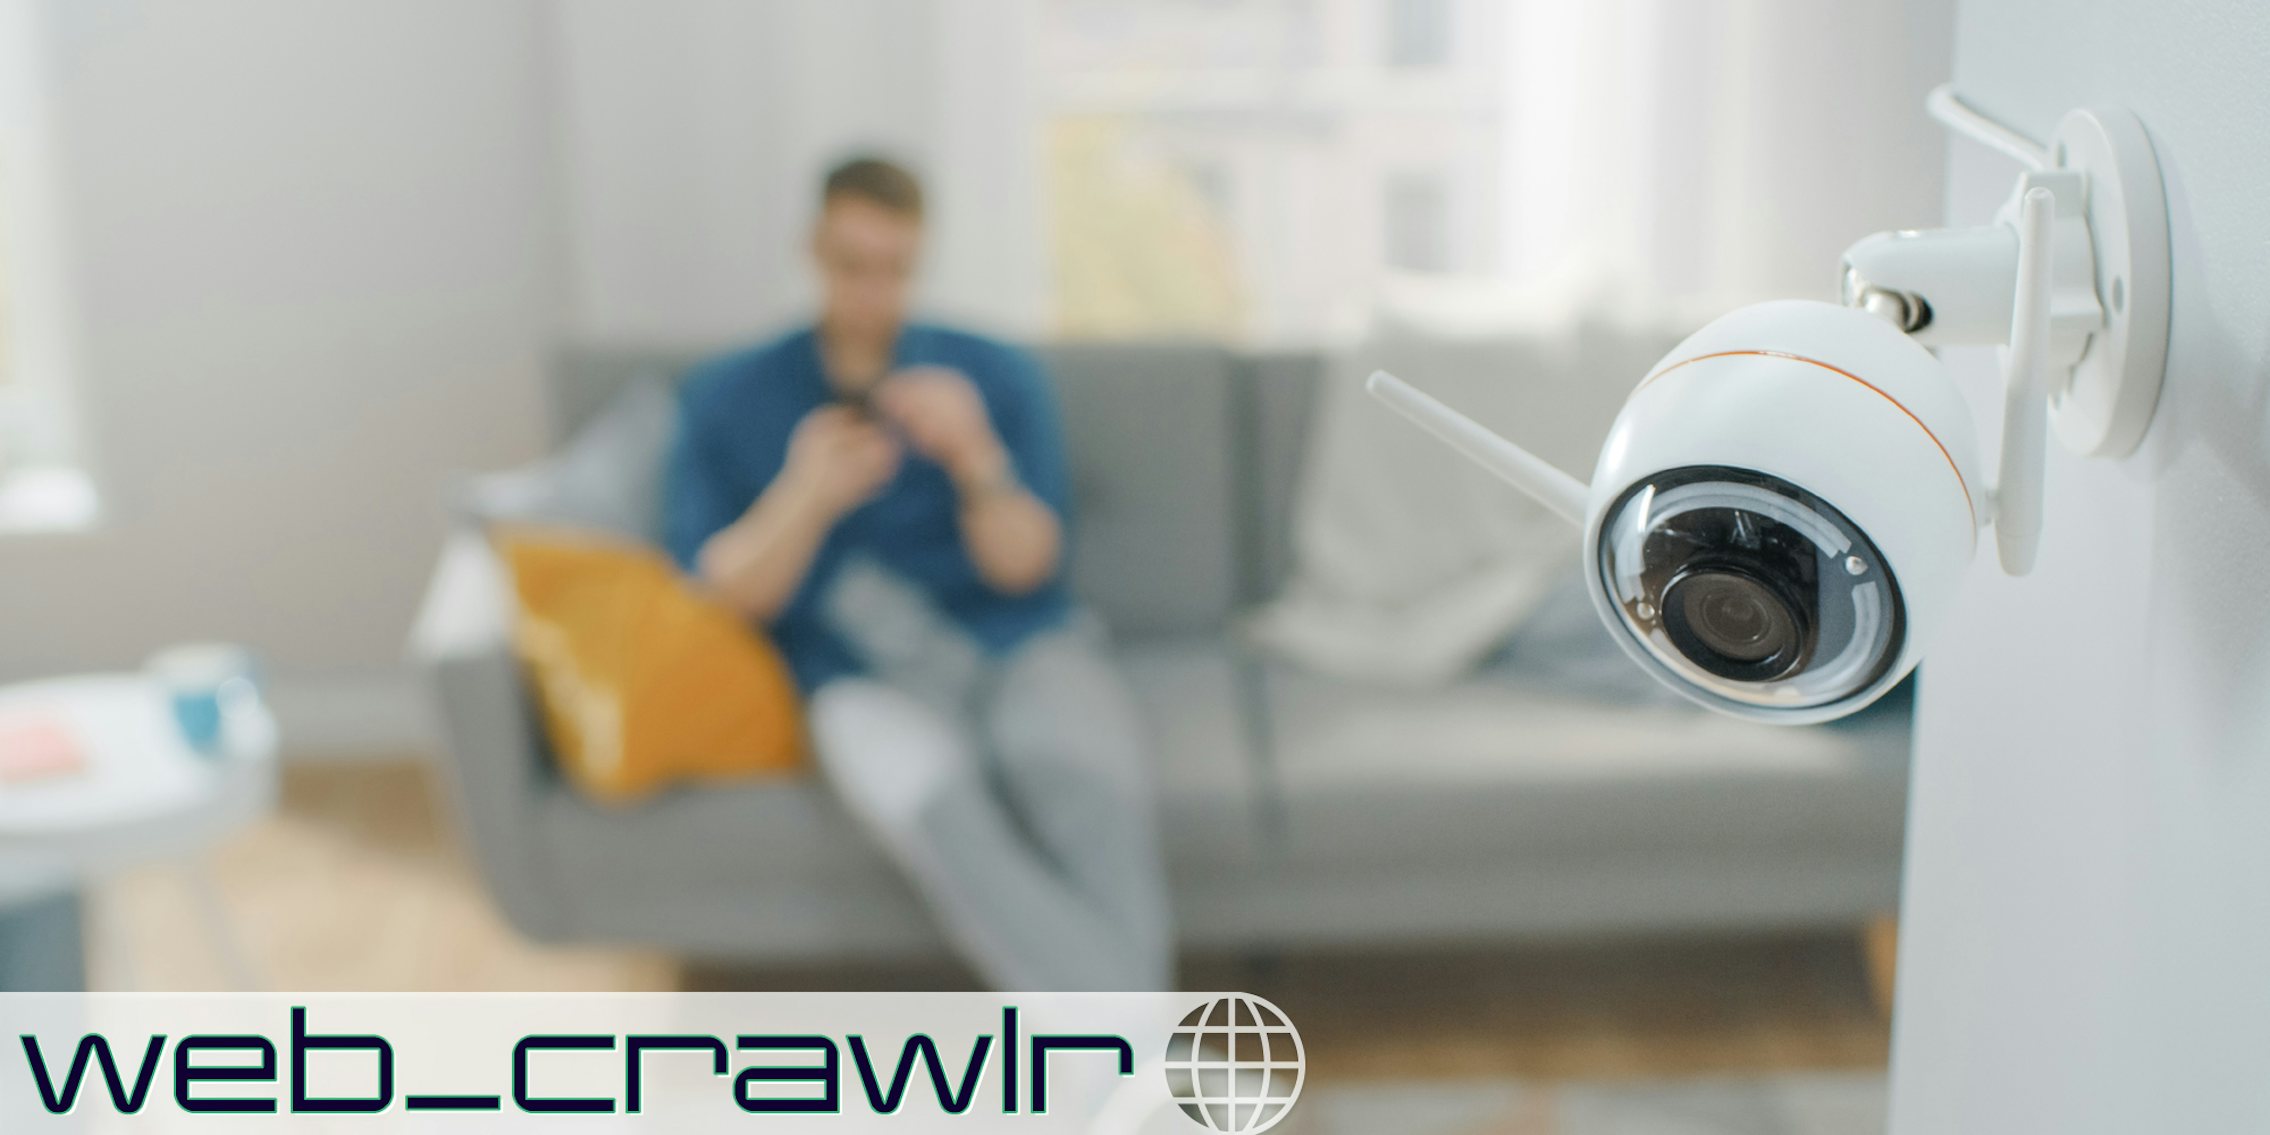 A camera in a living room. A person is sitting on the couch in the background. The Daily Dot newsletter web_crawlr logo is in the bottom left corner.